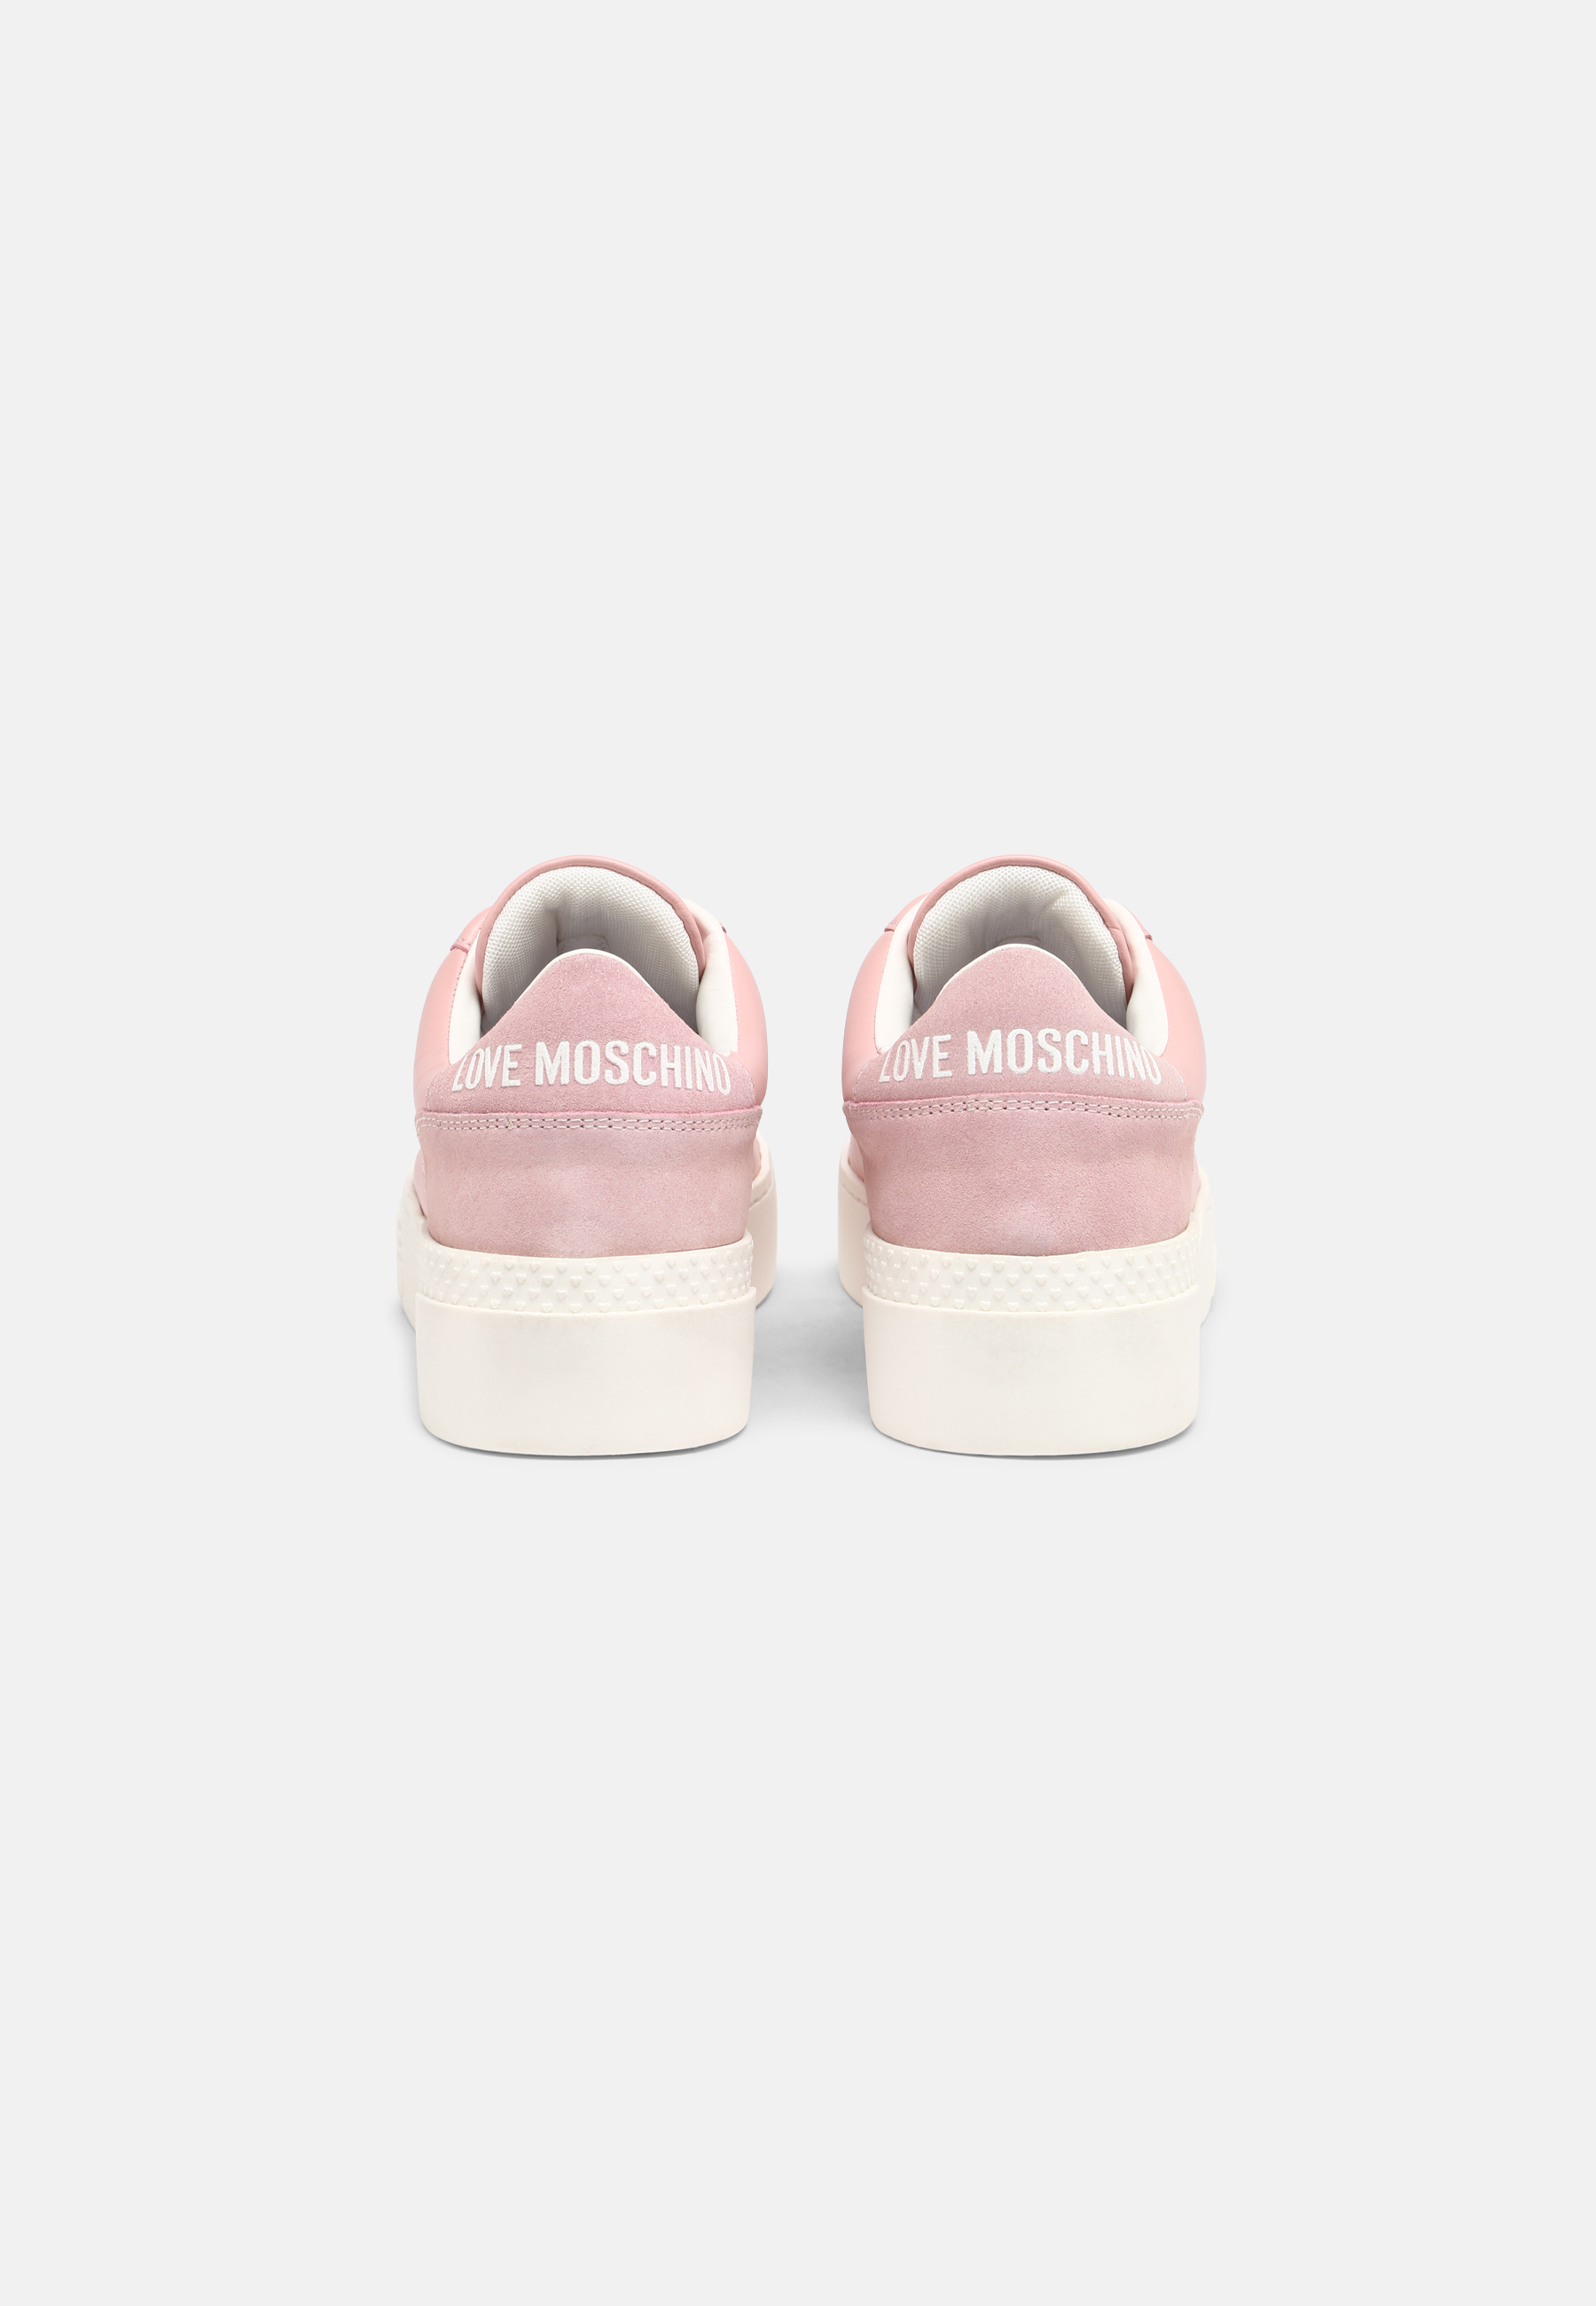 Love Moschino Sneaker Red Heart in Rosa 